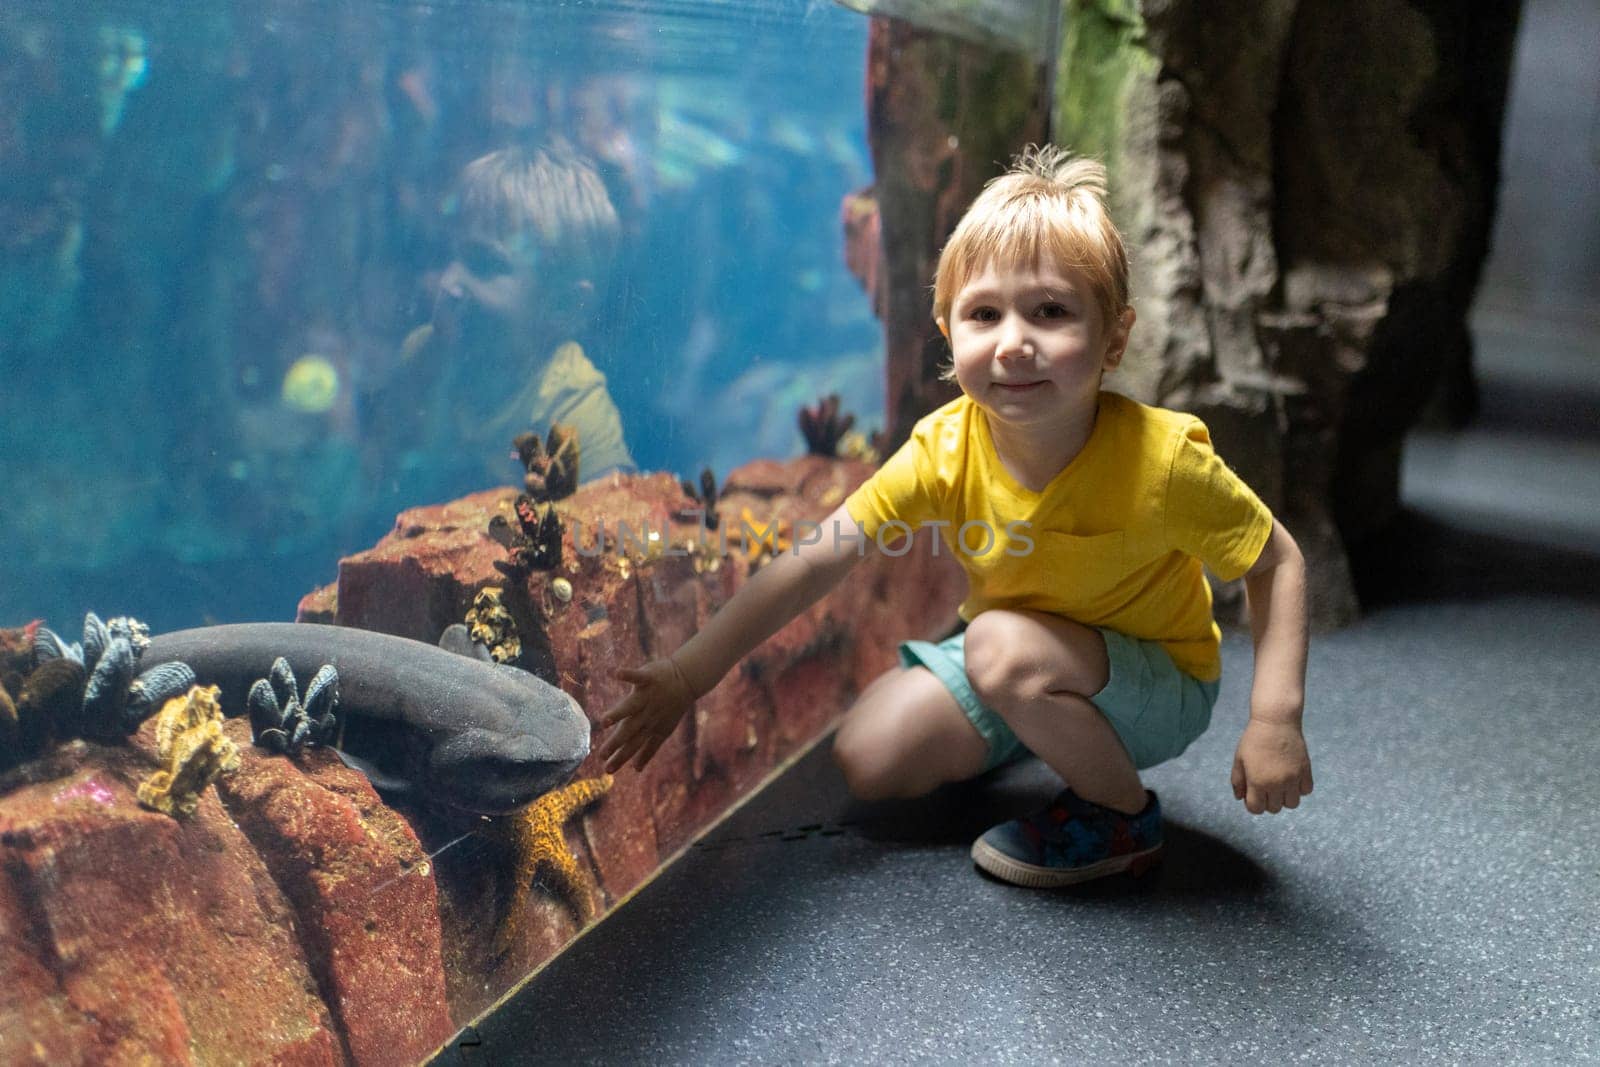 A young boy is kneeling in front of a fish tank - large aquarium by Studia72